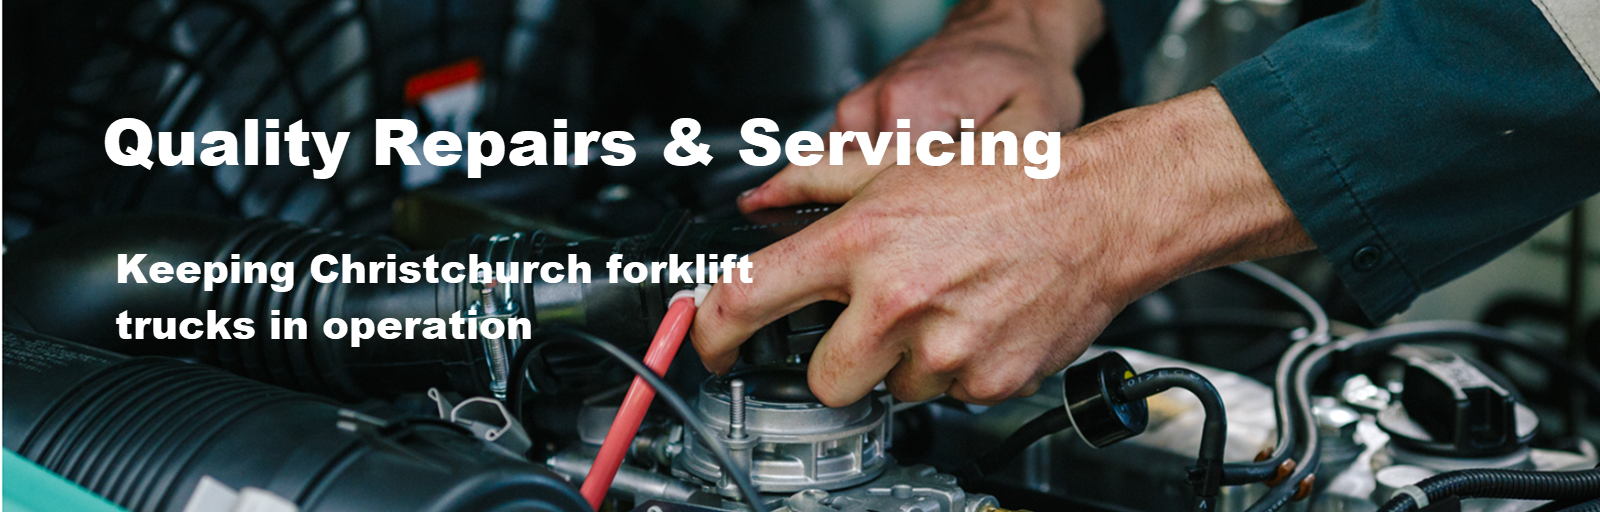 Christchurch repairs and service